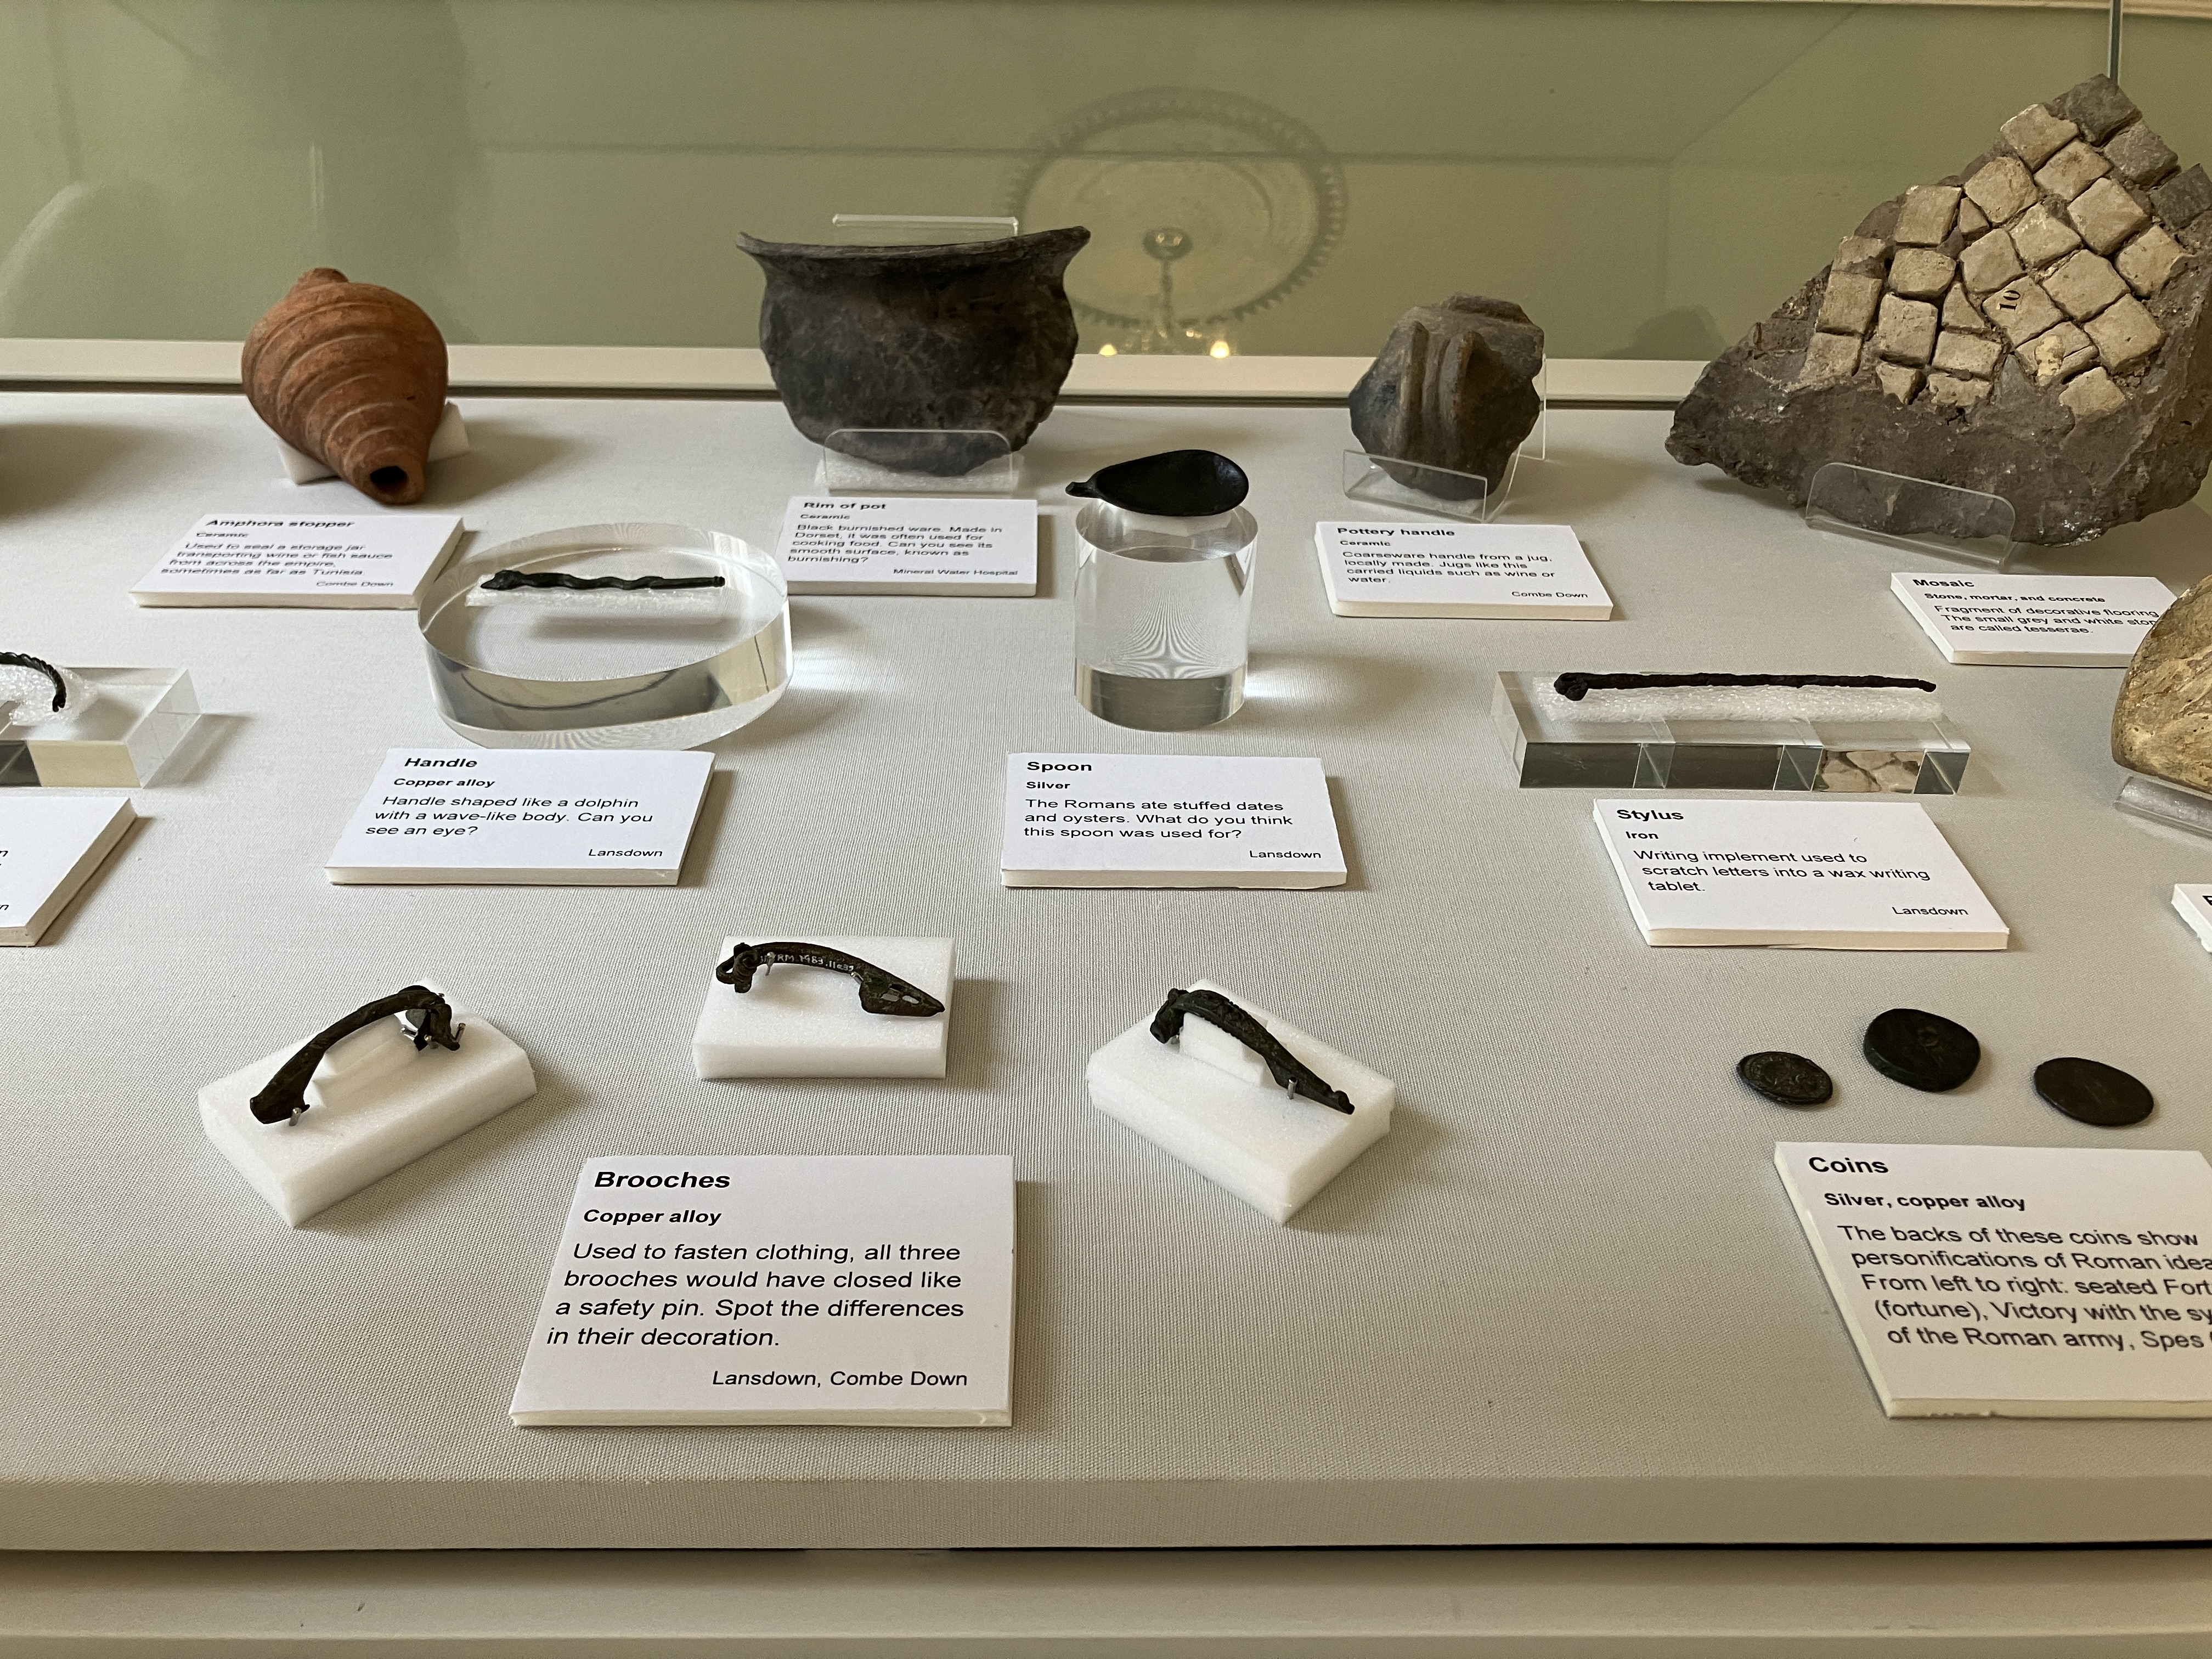 Display of objects in a glass case